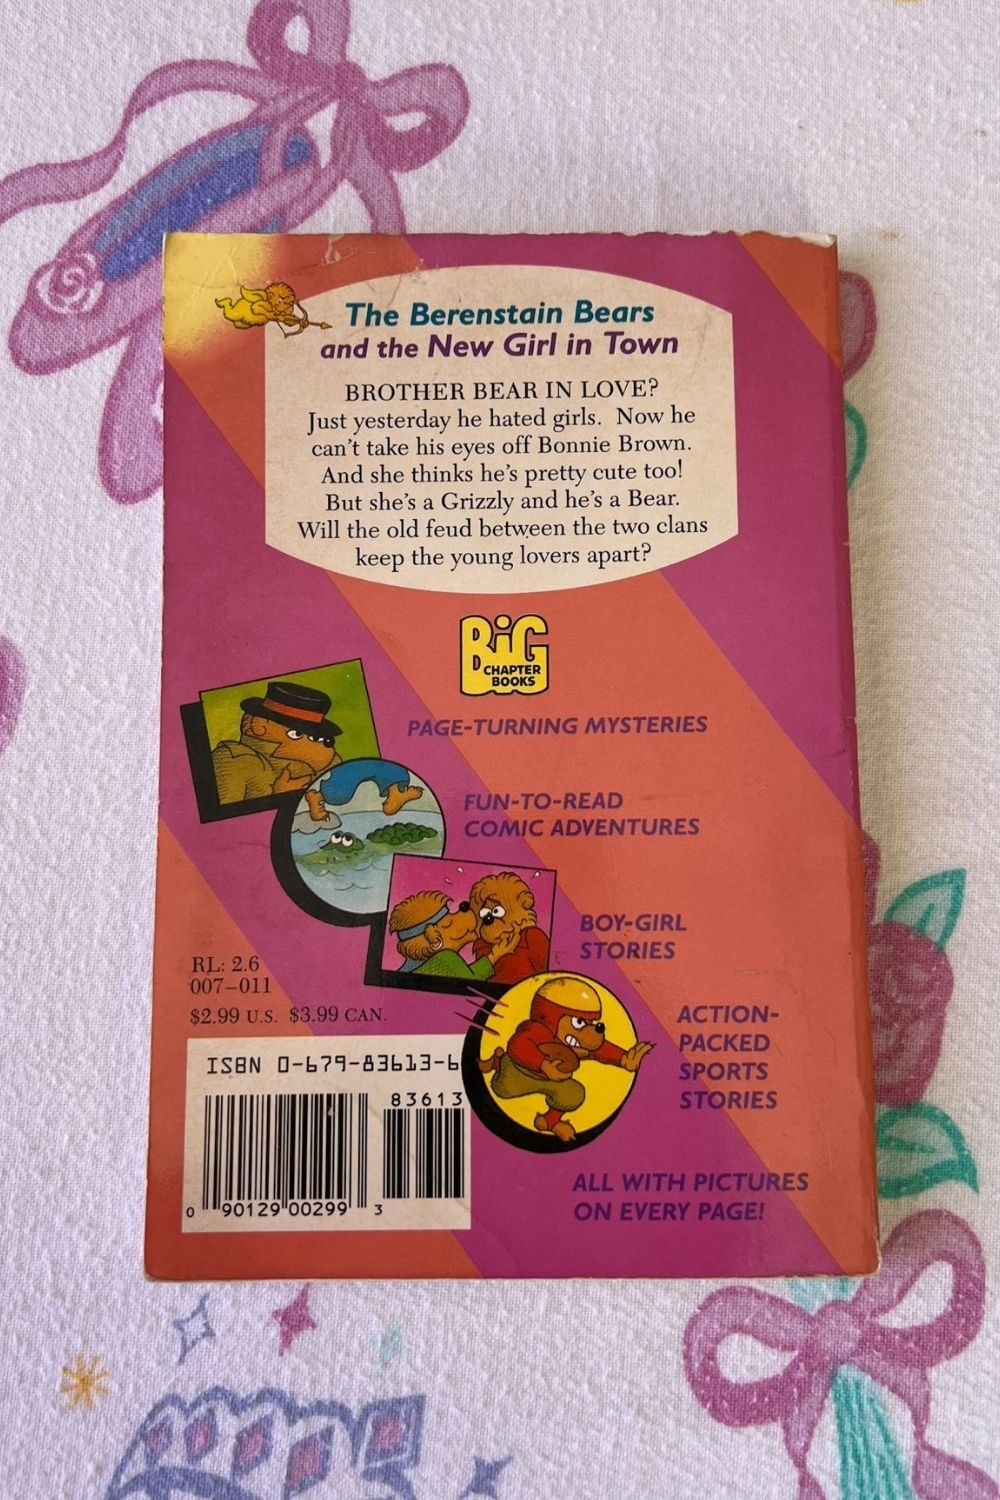 THE BERENSTAIN BEARS BOOK - NEW GIRL IN TOWN*